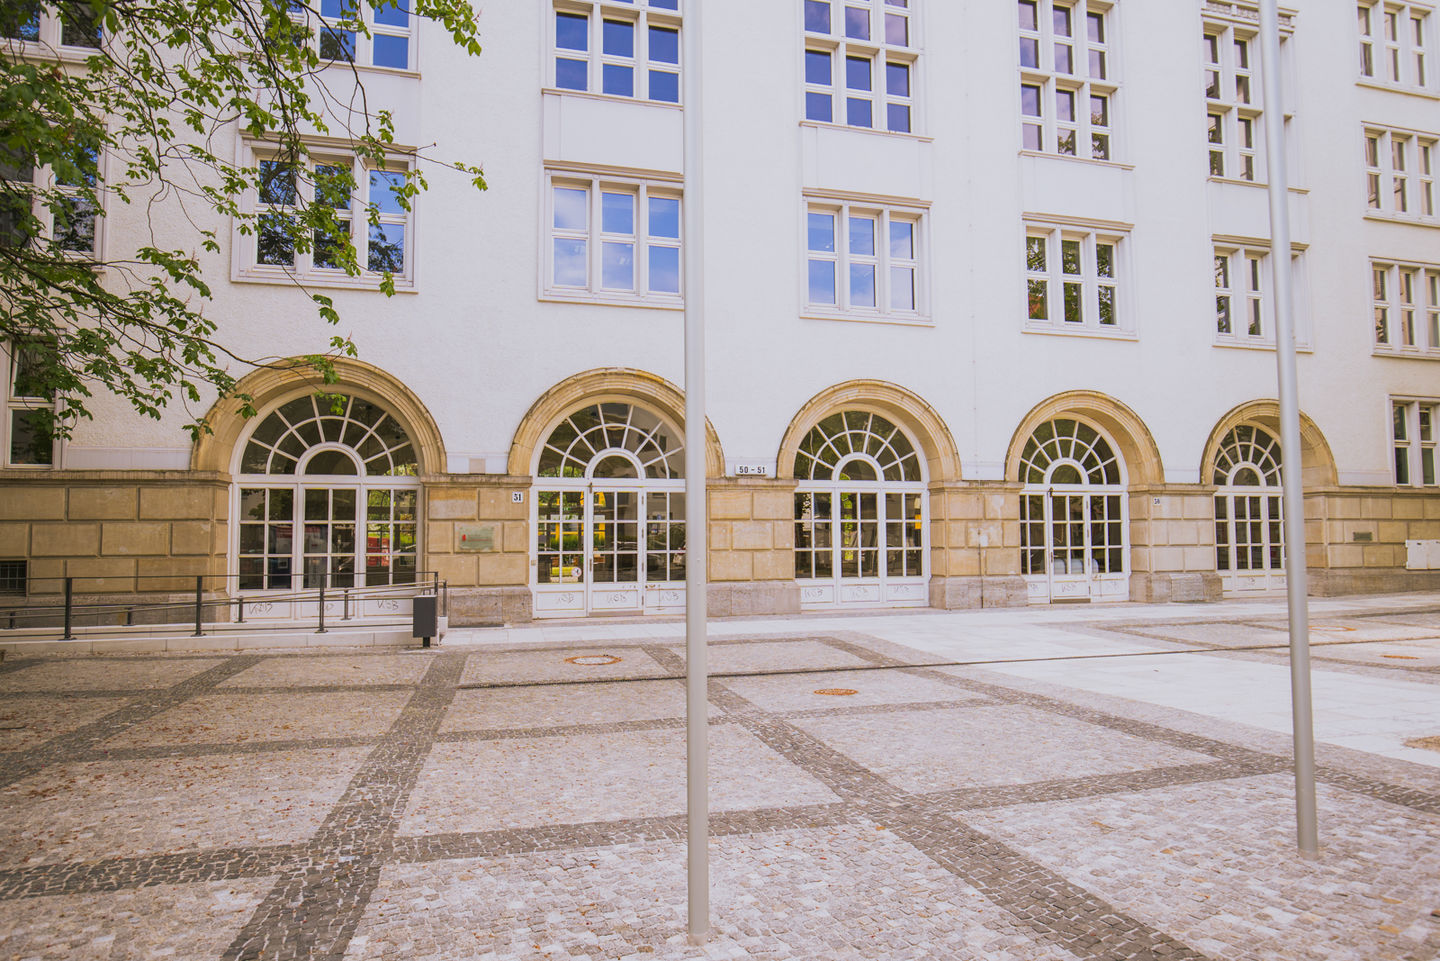 Studying at the Schöneberg Campus of the HWR Berlin: forecourt and main entrance House B. Photo: Oana Popa-Costea